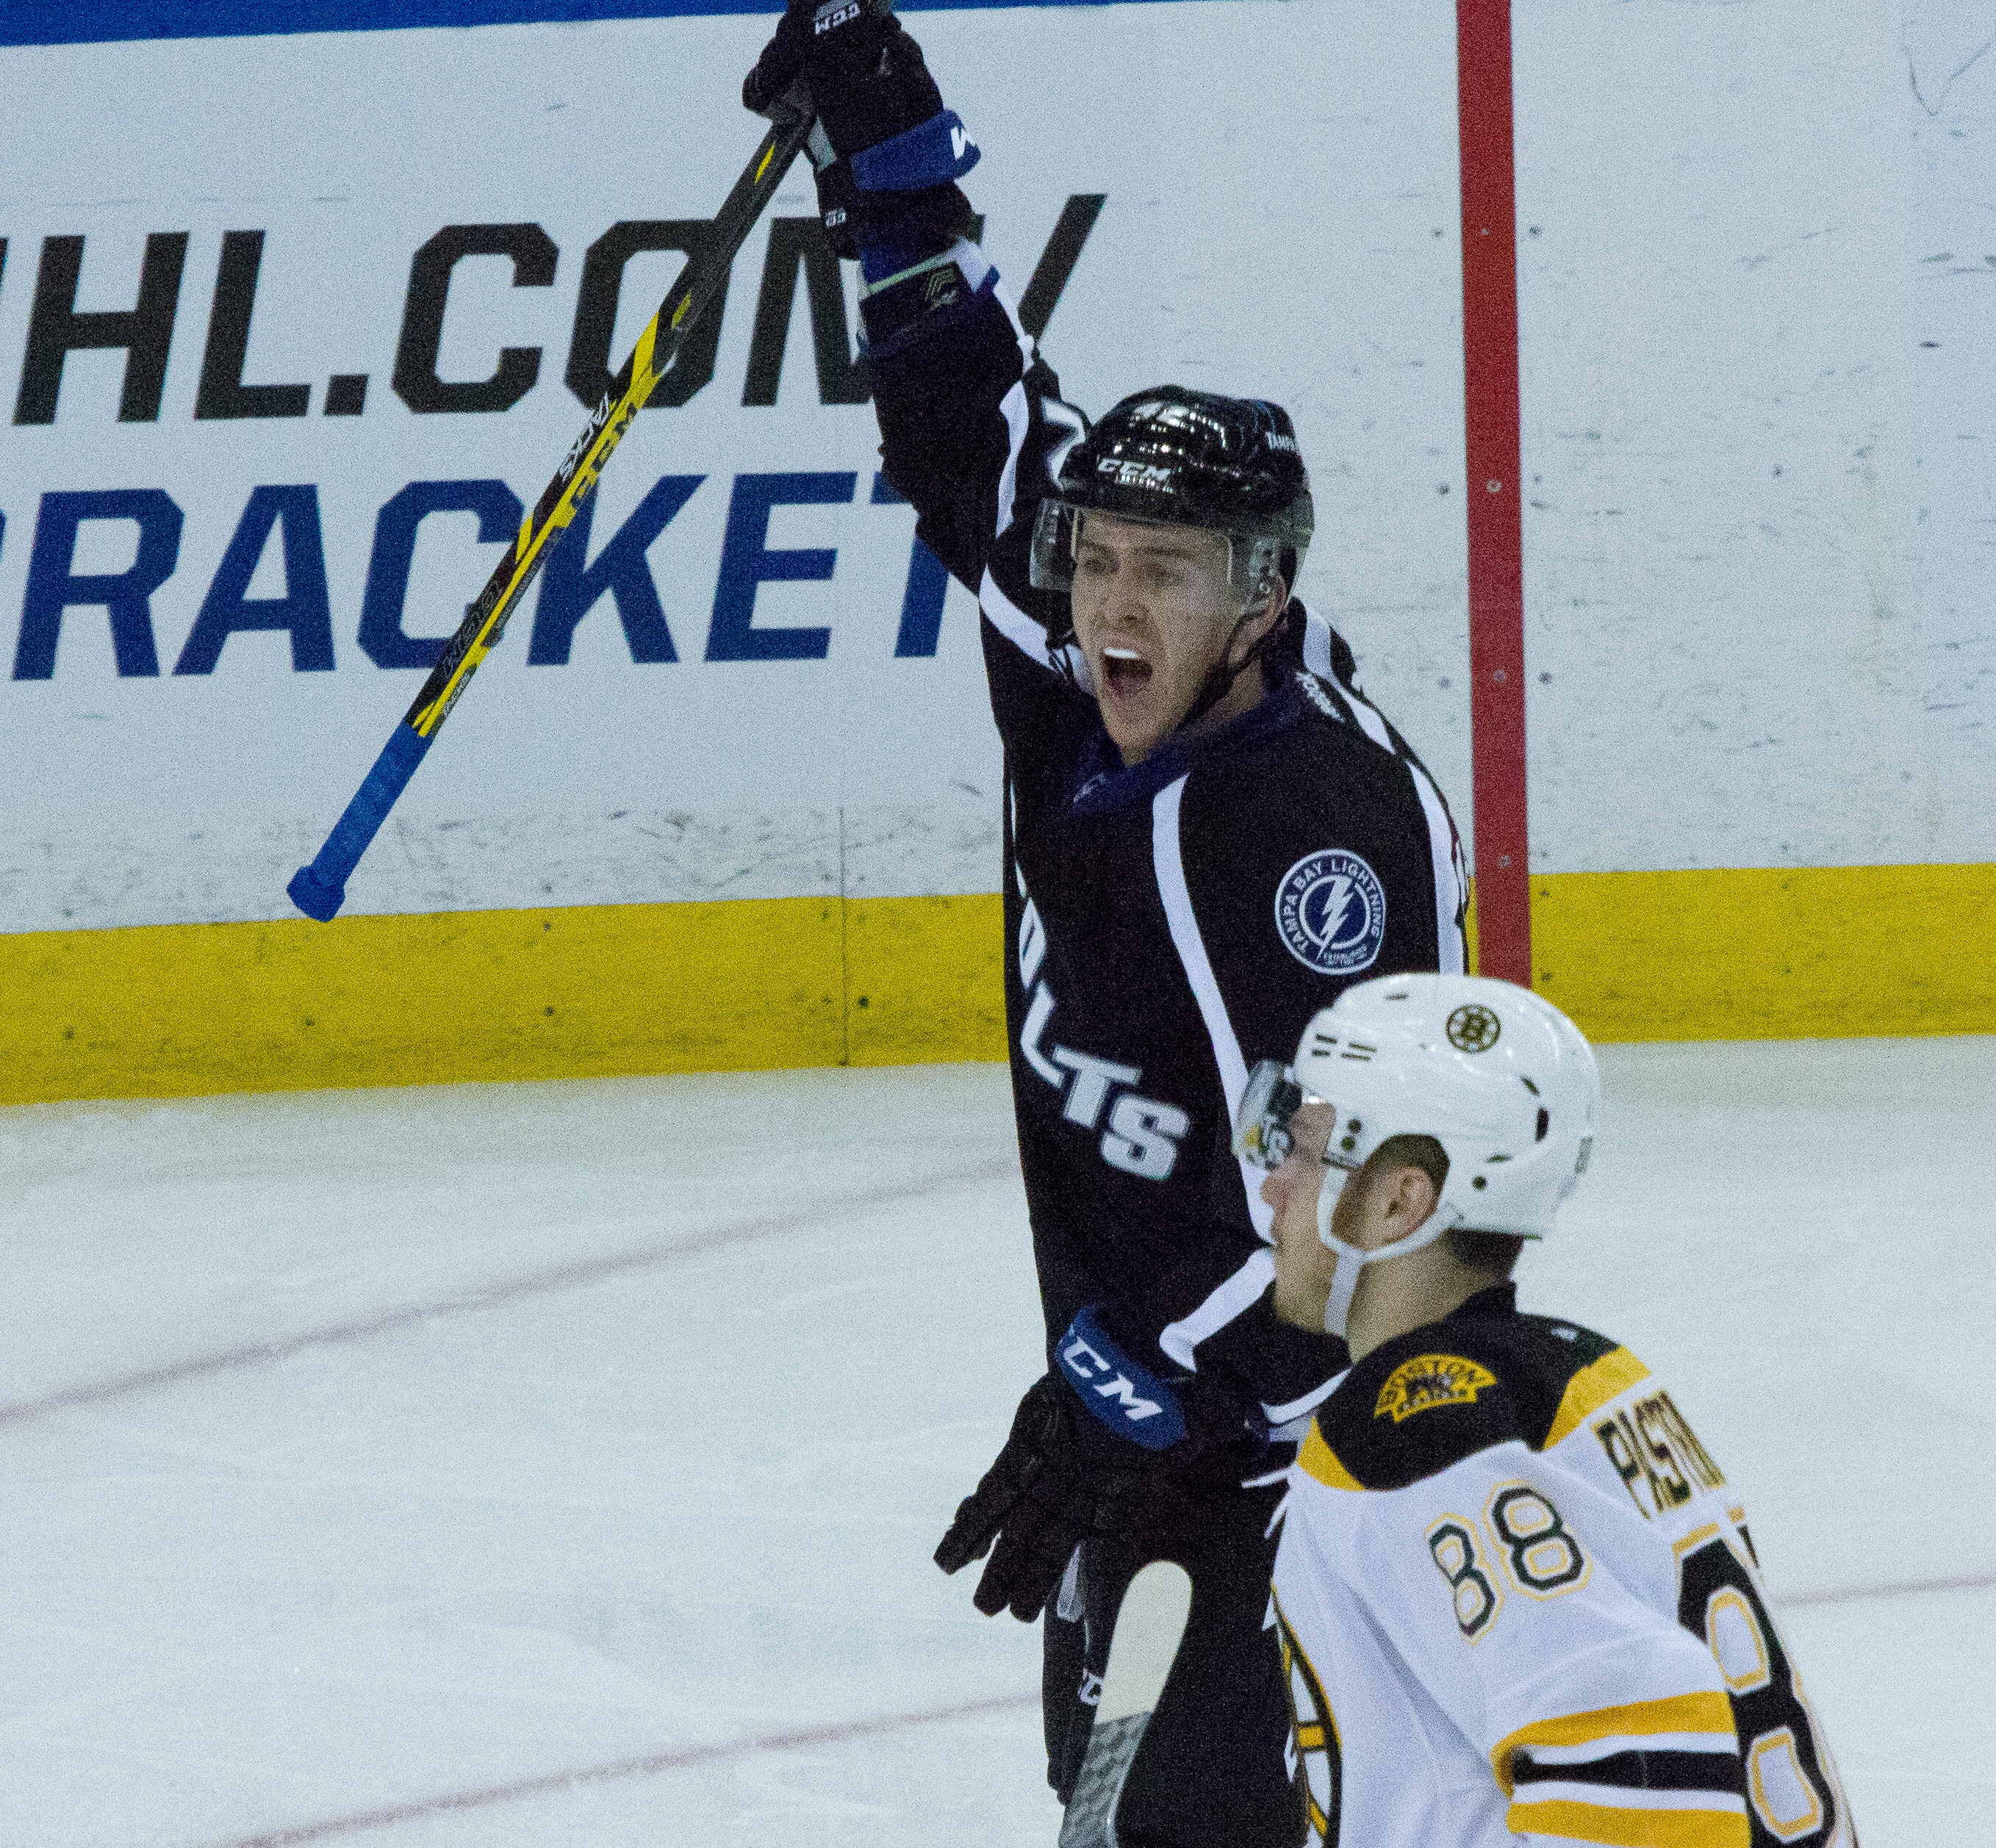 Newcomer Jonathan Marchessault celebrates his goal against the Bruins./JEFFREY S. KING